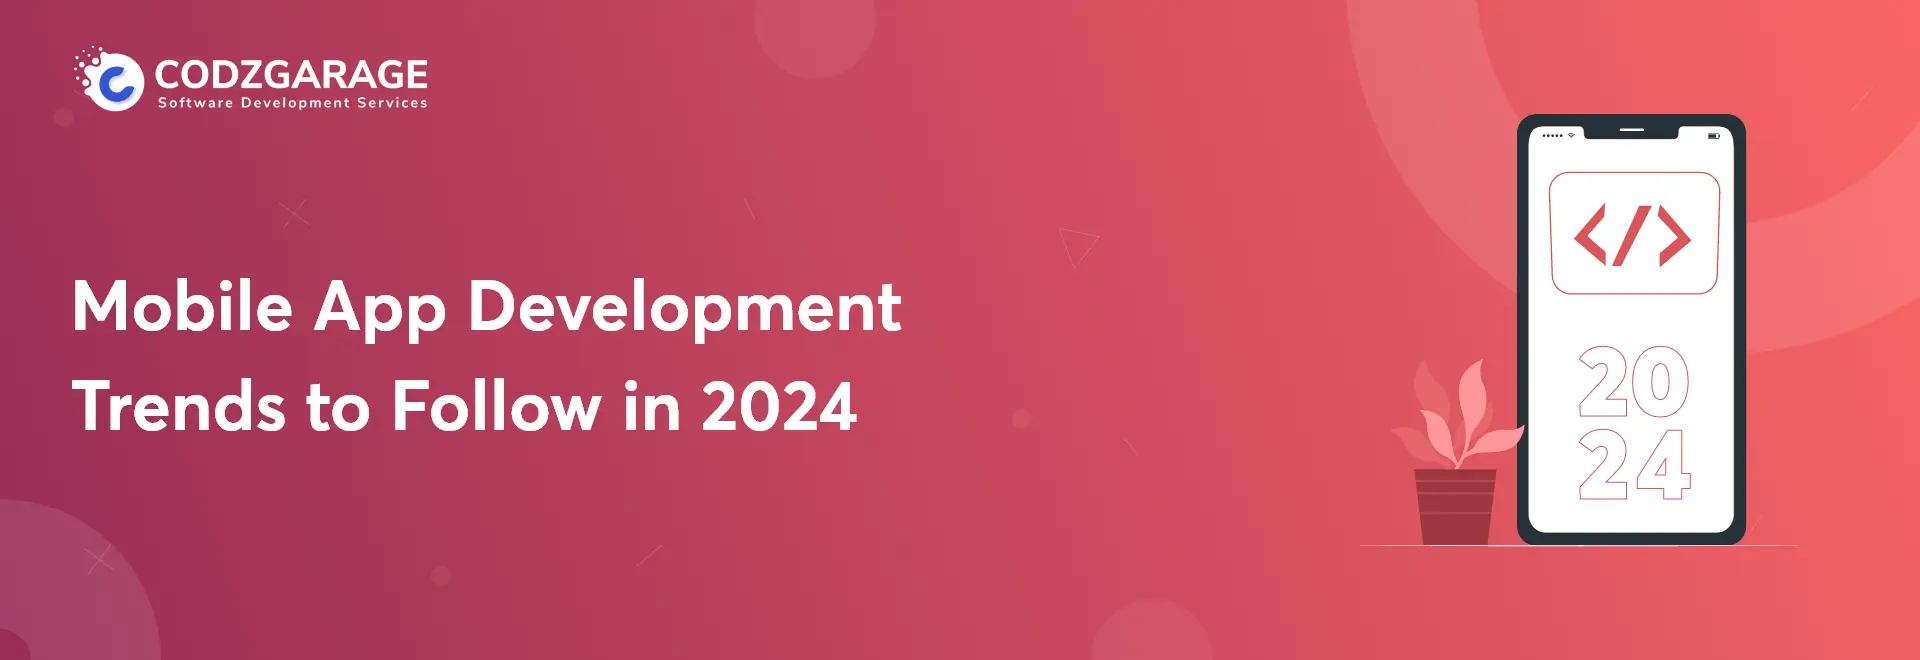 mobile-app-development-trends-to-follow-in-2023-and-ahead